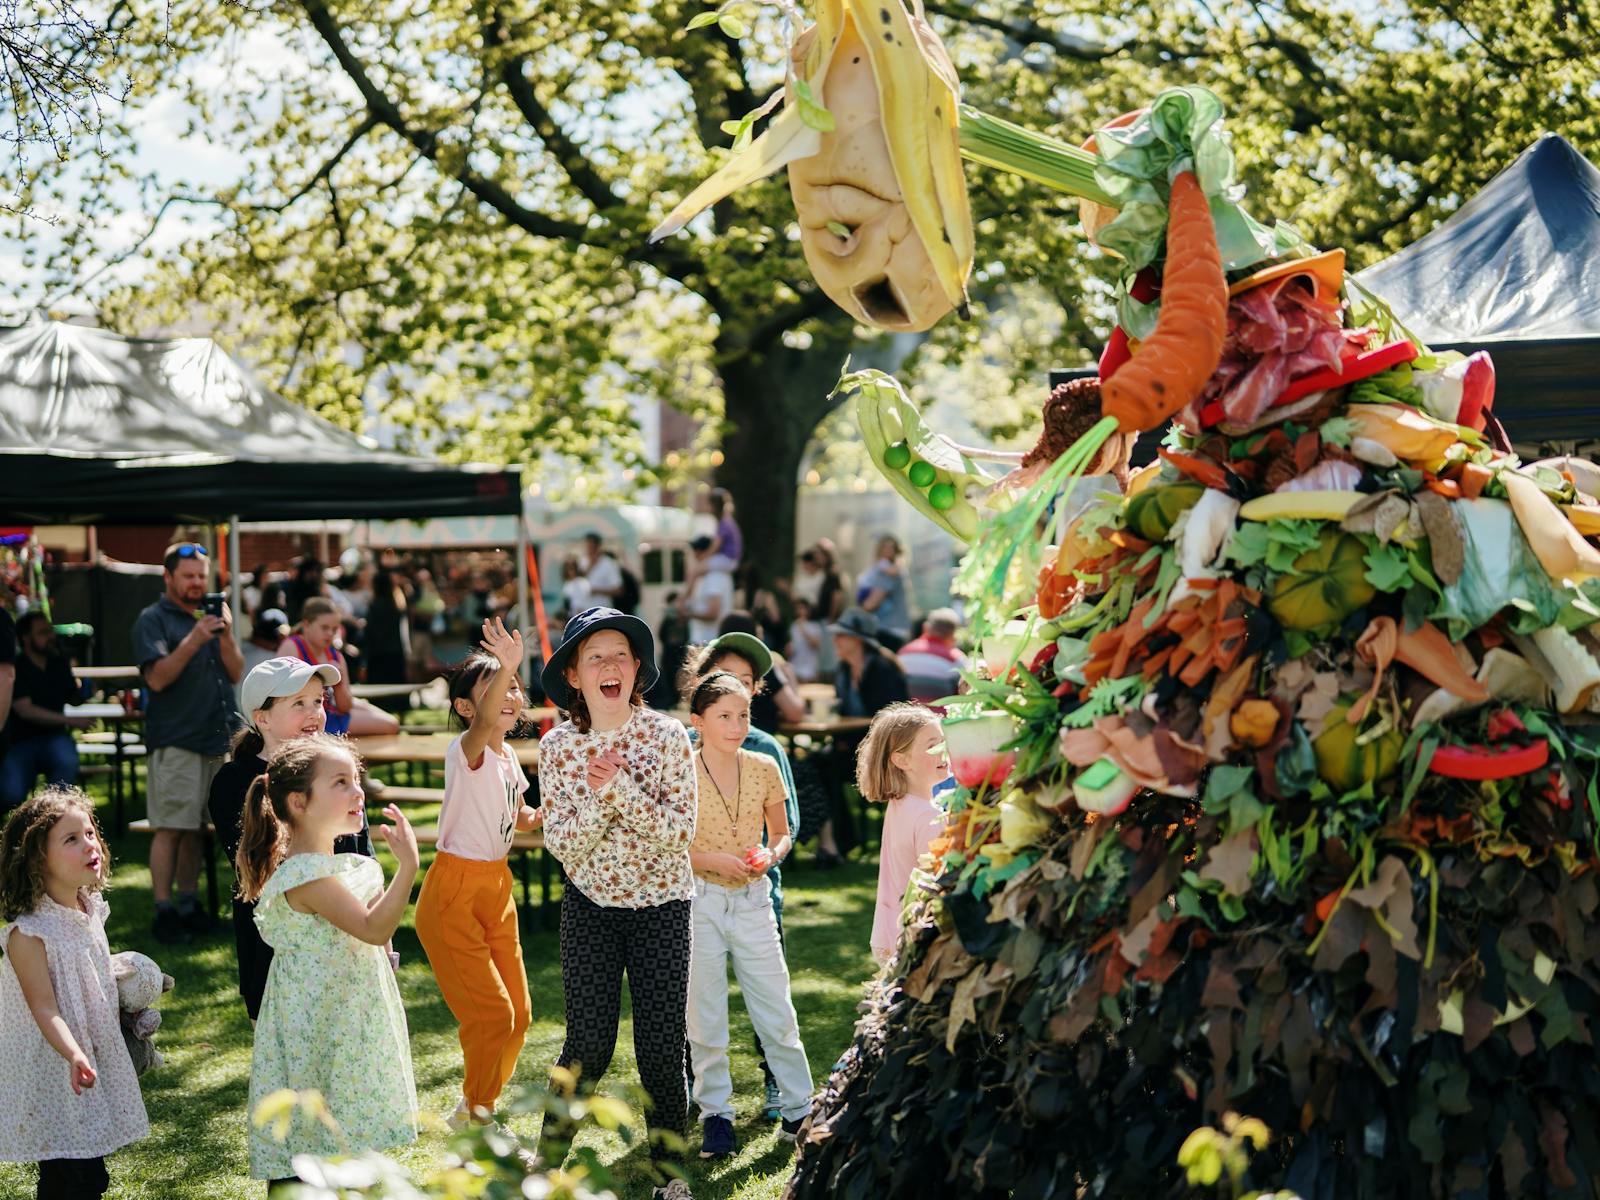 Large material puppet made to look like living compost heap delights young children